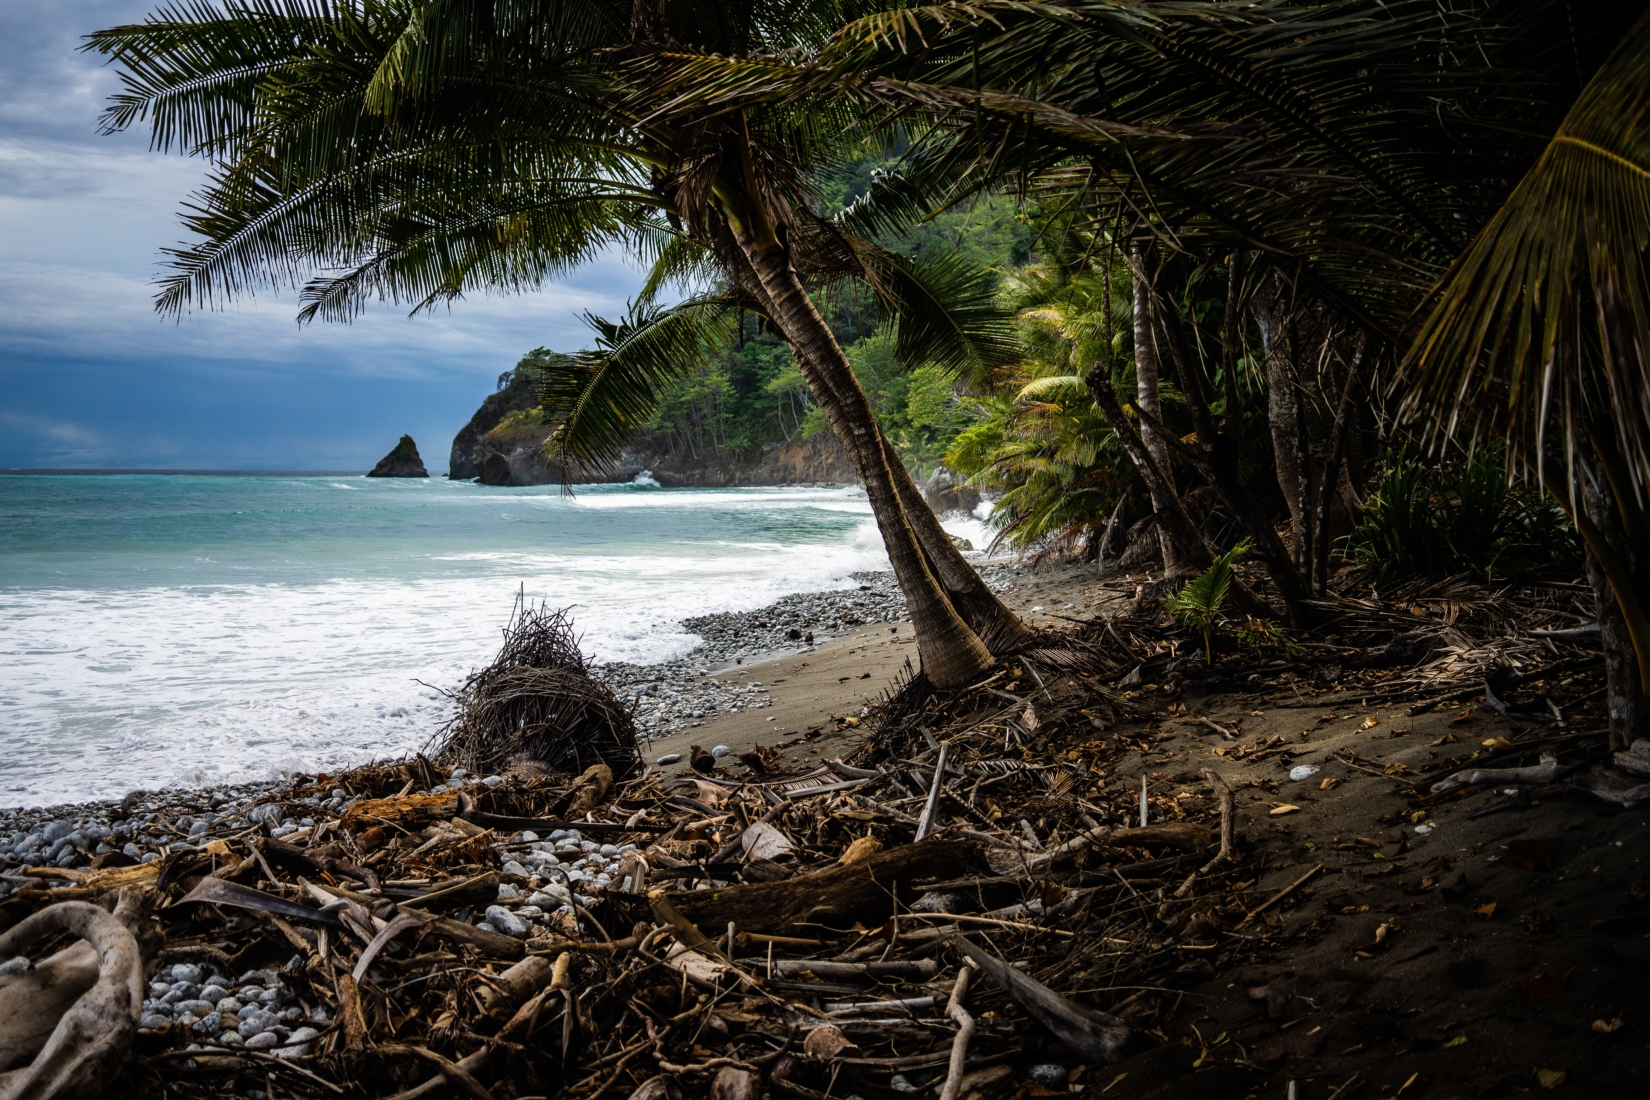 A palm tree divides the image of a beach filled with branches in two between ocean and jungle